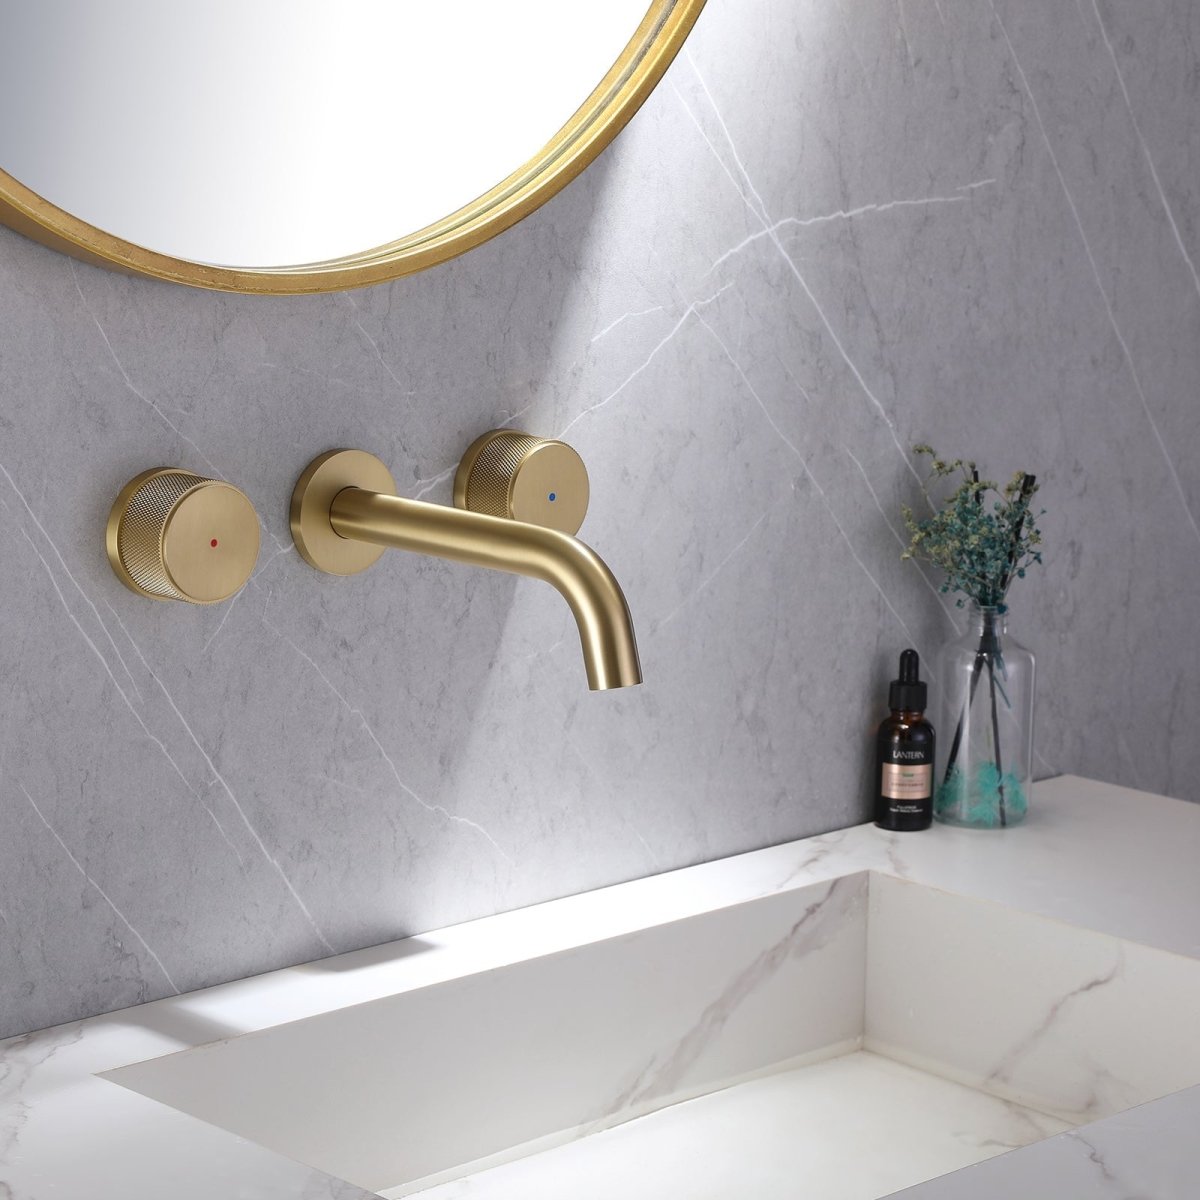 Wall Mounted Double Hole Two Handle Bathroom Faucet Gold - buyfaucet.com